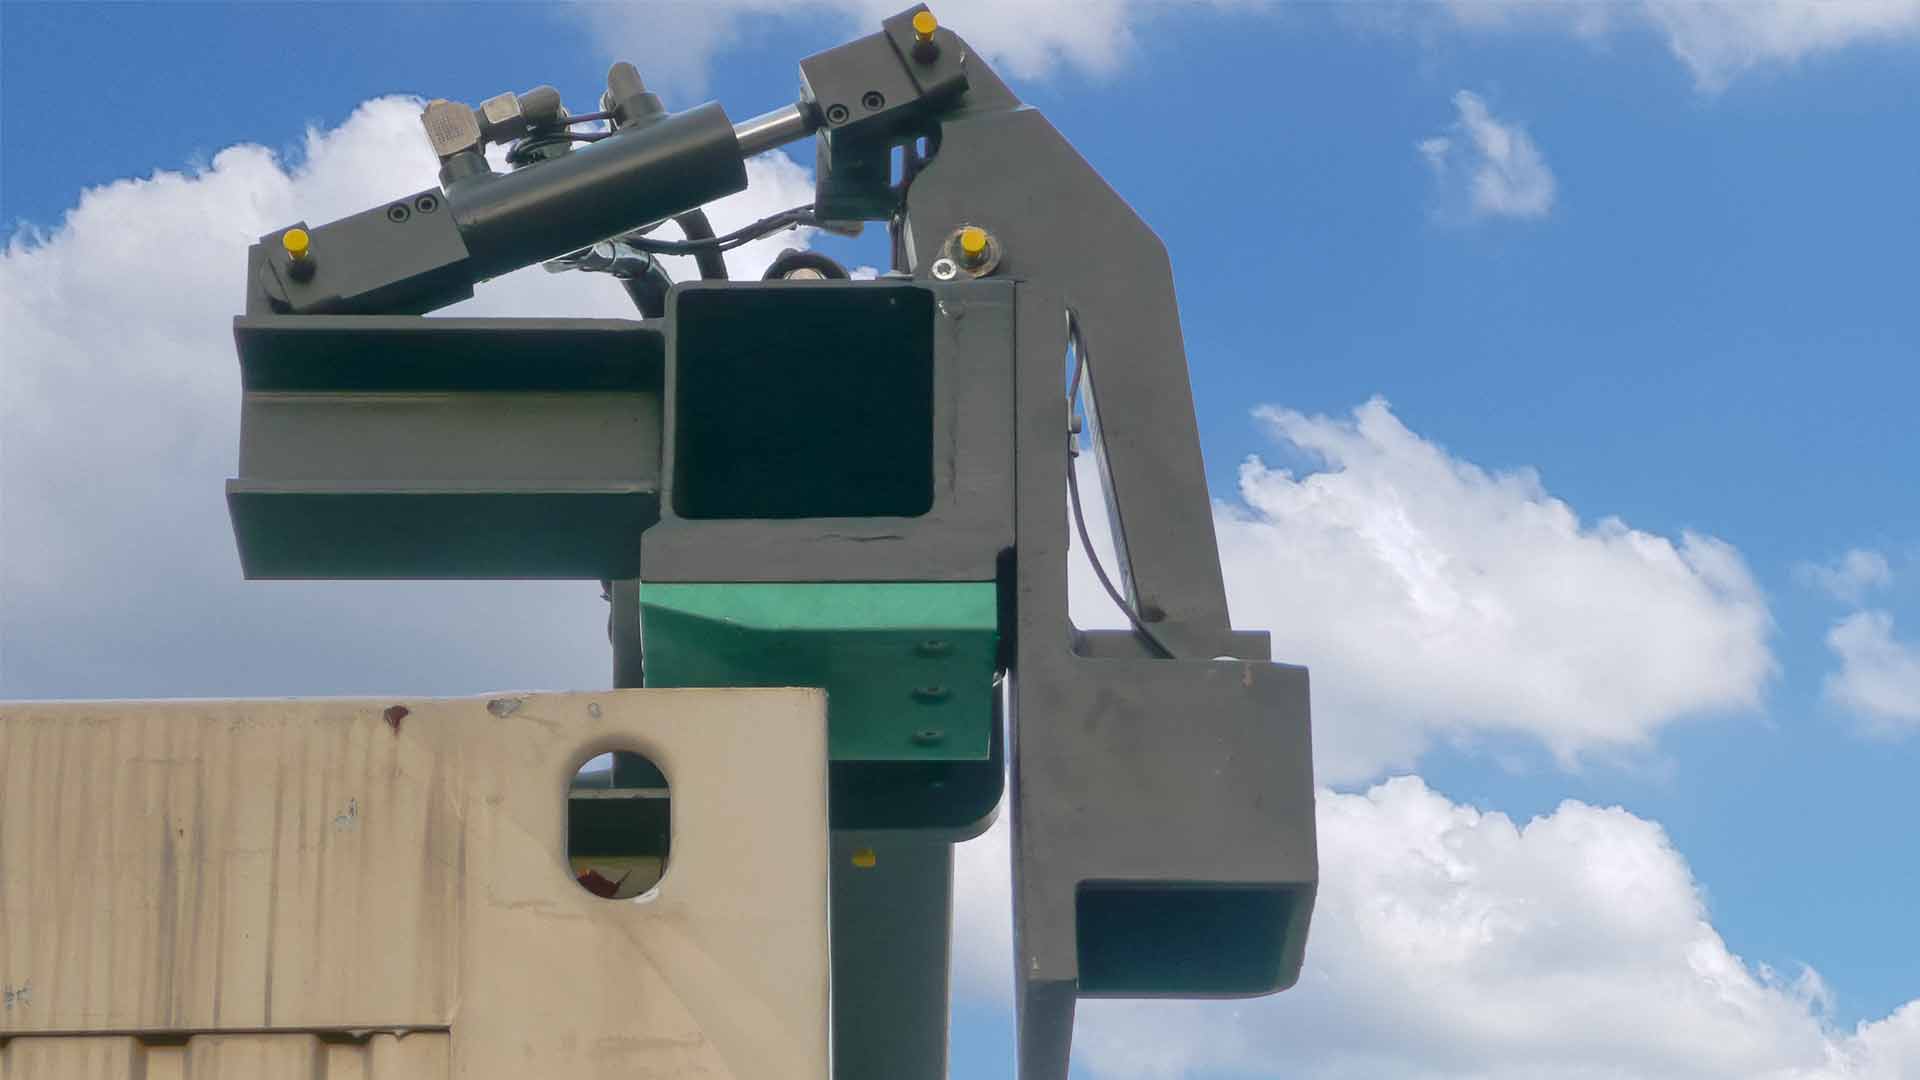 The outer angle of a top spreader attaches to the top corner of a container for transport